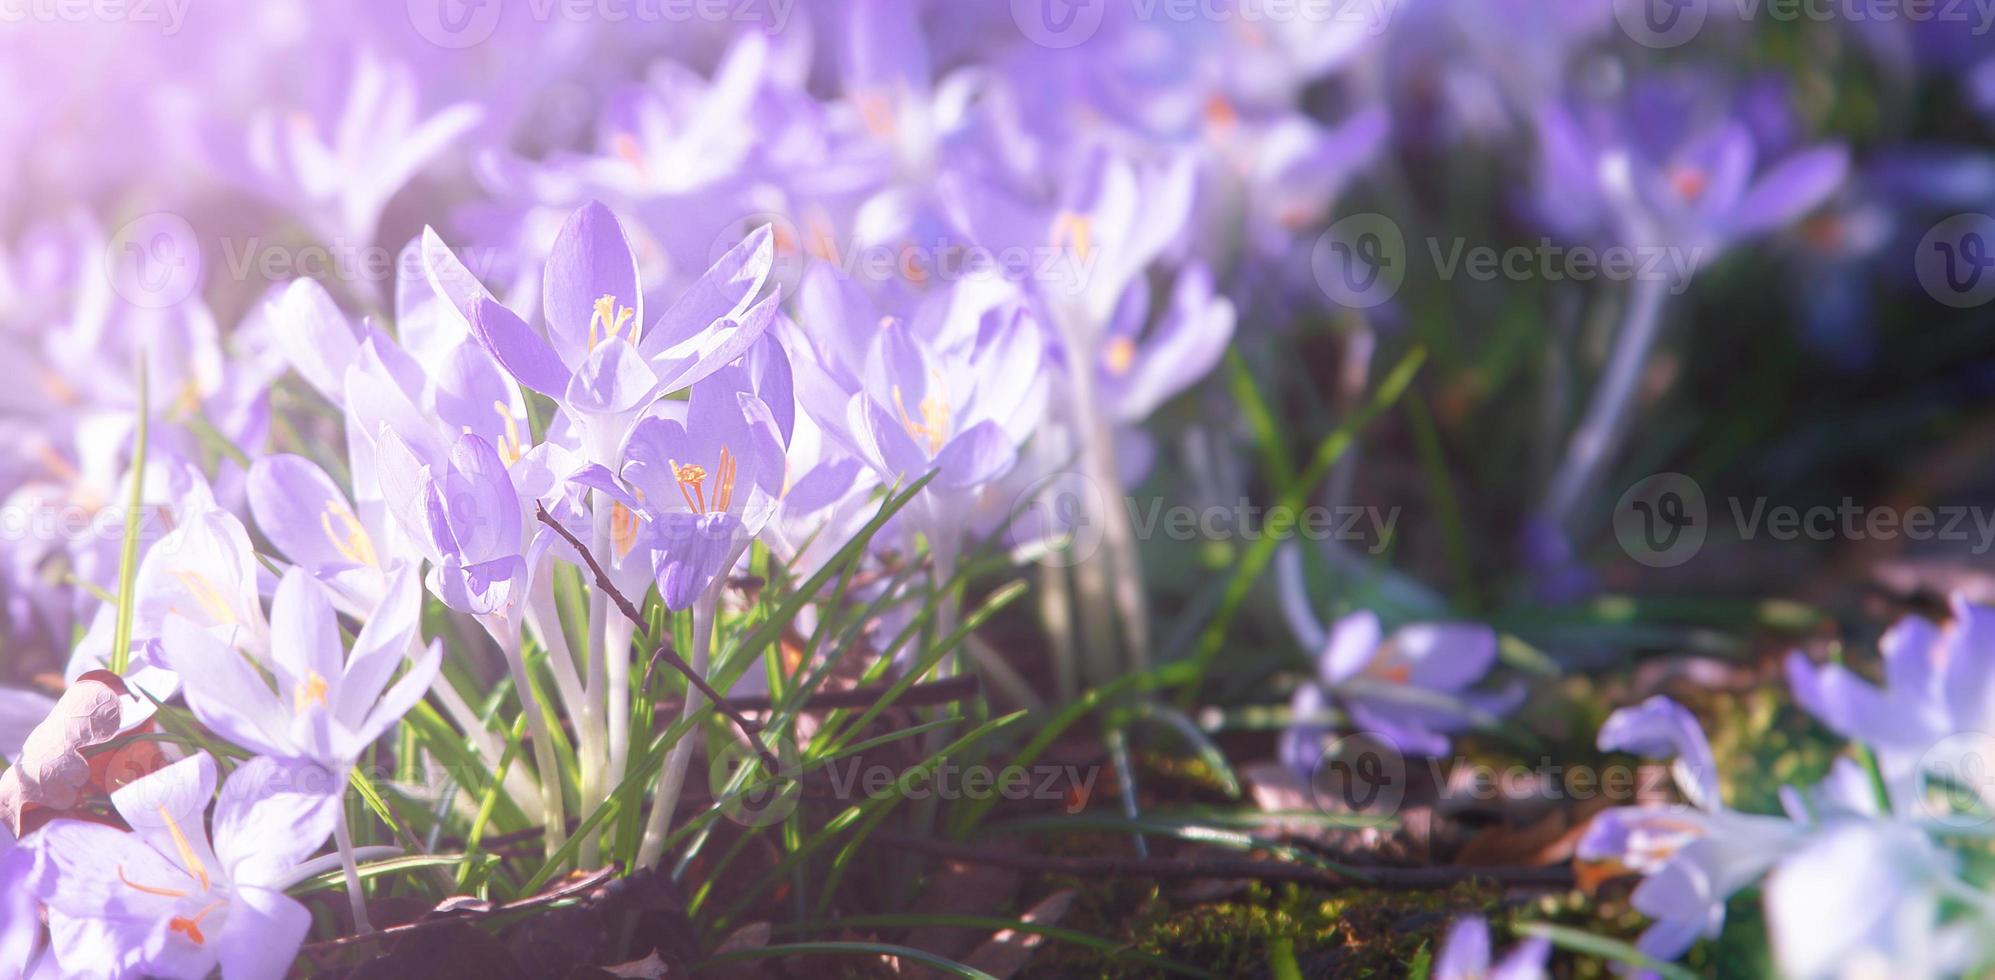 Blooming purple crocus flowers in a soft focus on a sunny spring day photo